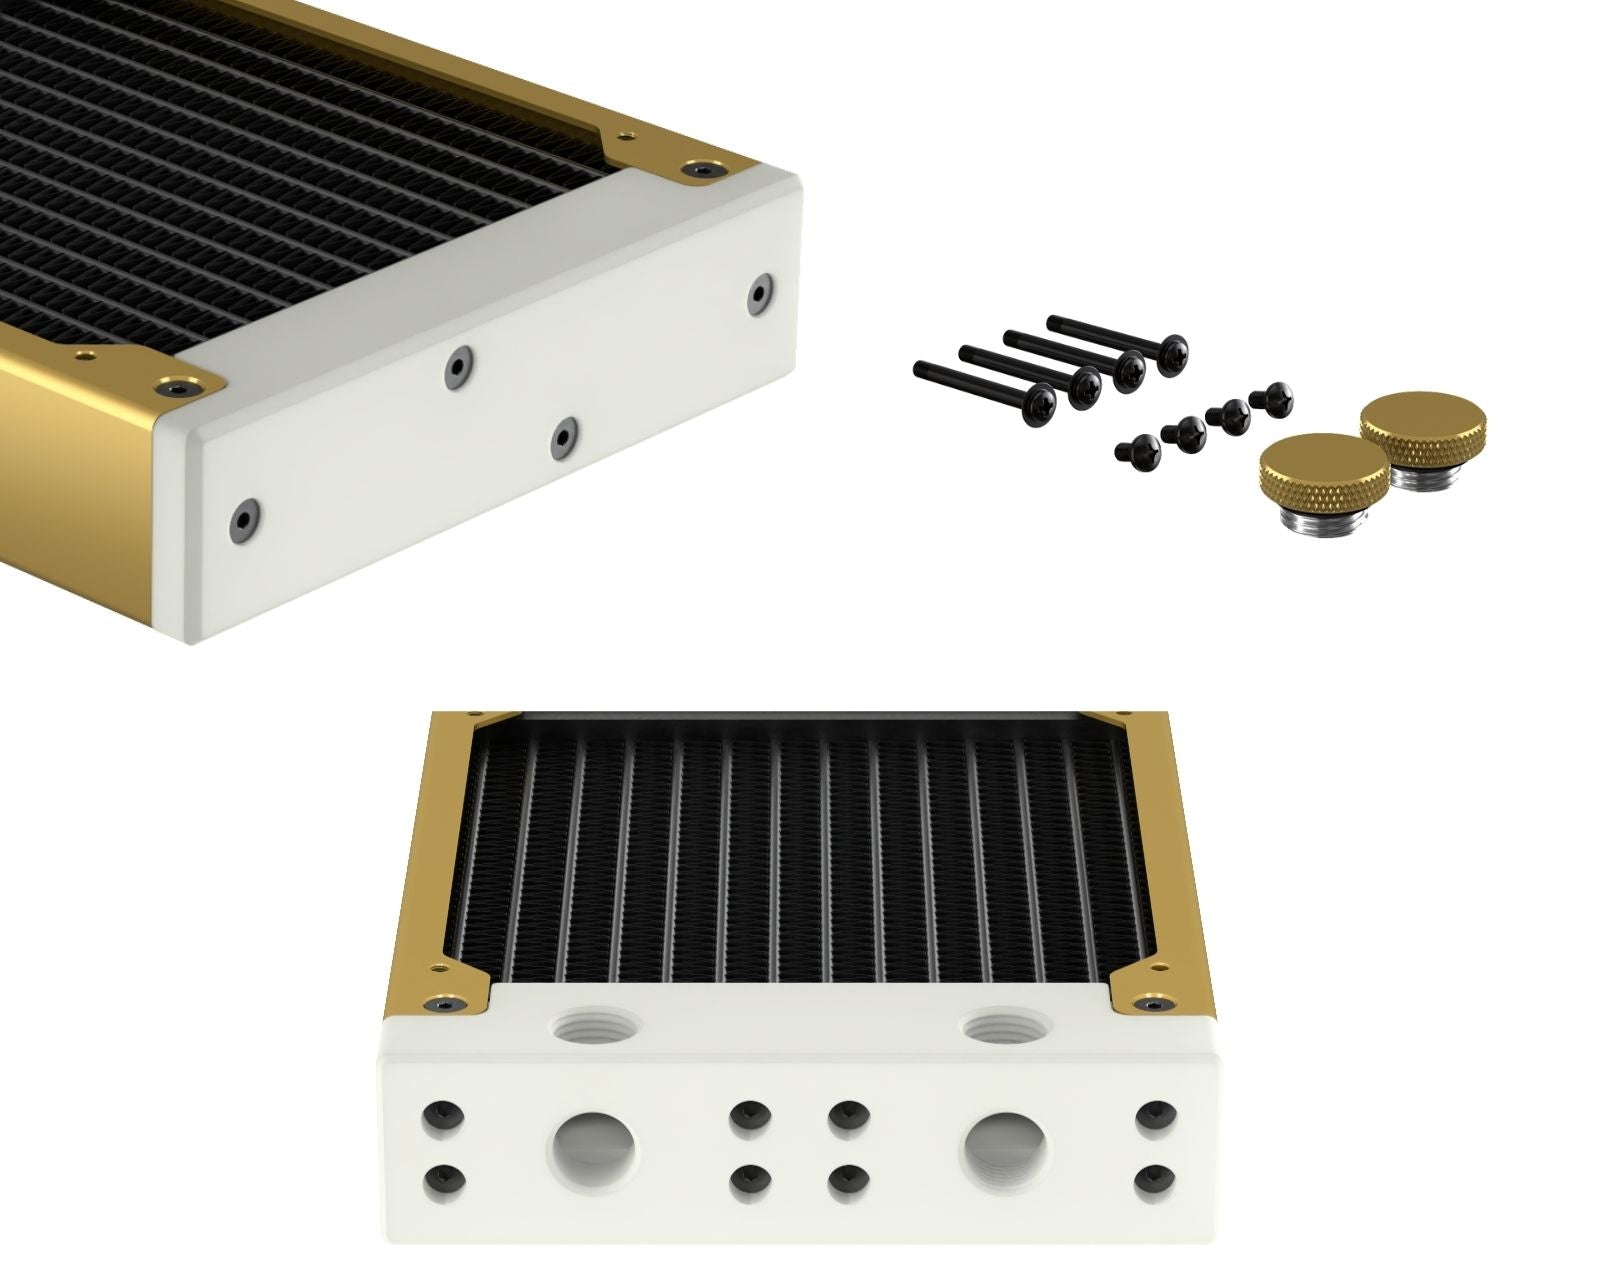 PrimoChill 120SL (30mm) EXIMO Modular Radiator, White POM, 1x120mm, Single Fan (R-SL-W12) Available in 20+ Colors, Assembled in USA and Custom Watercooling Loop Ready - Candy Gold